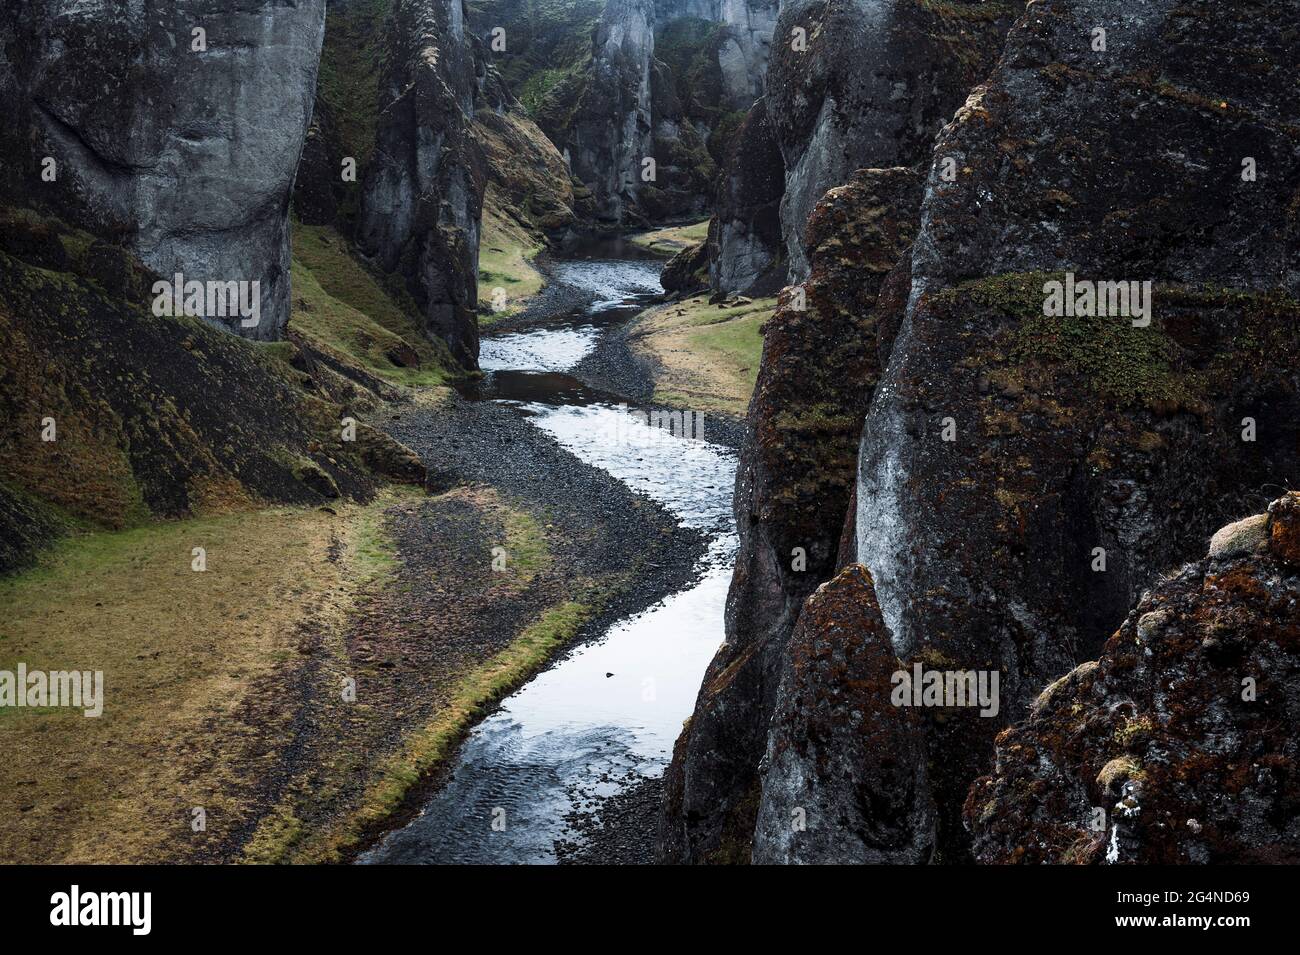 River in valley with steep sides Stock Photo